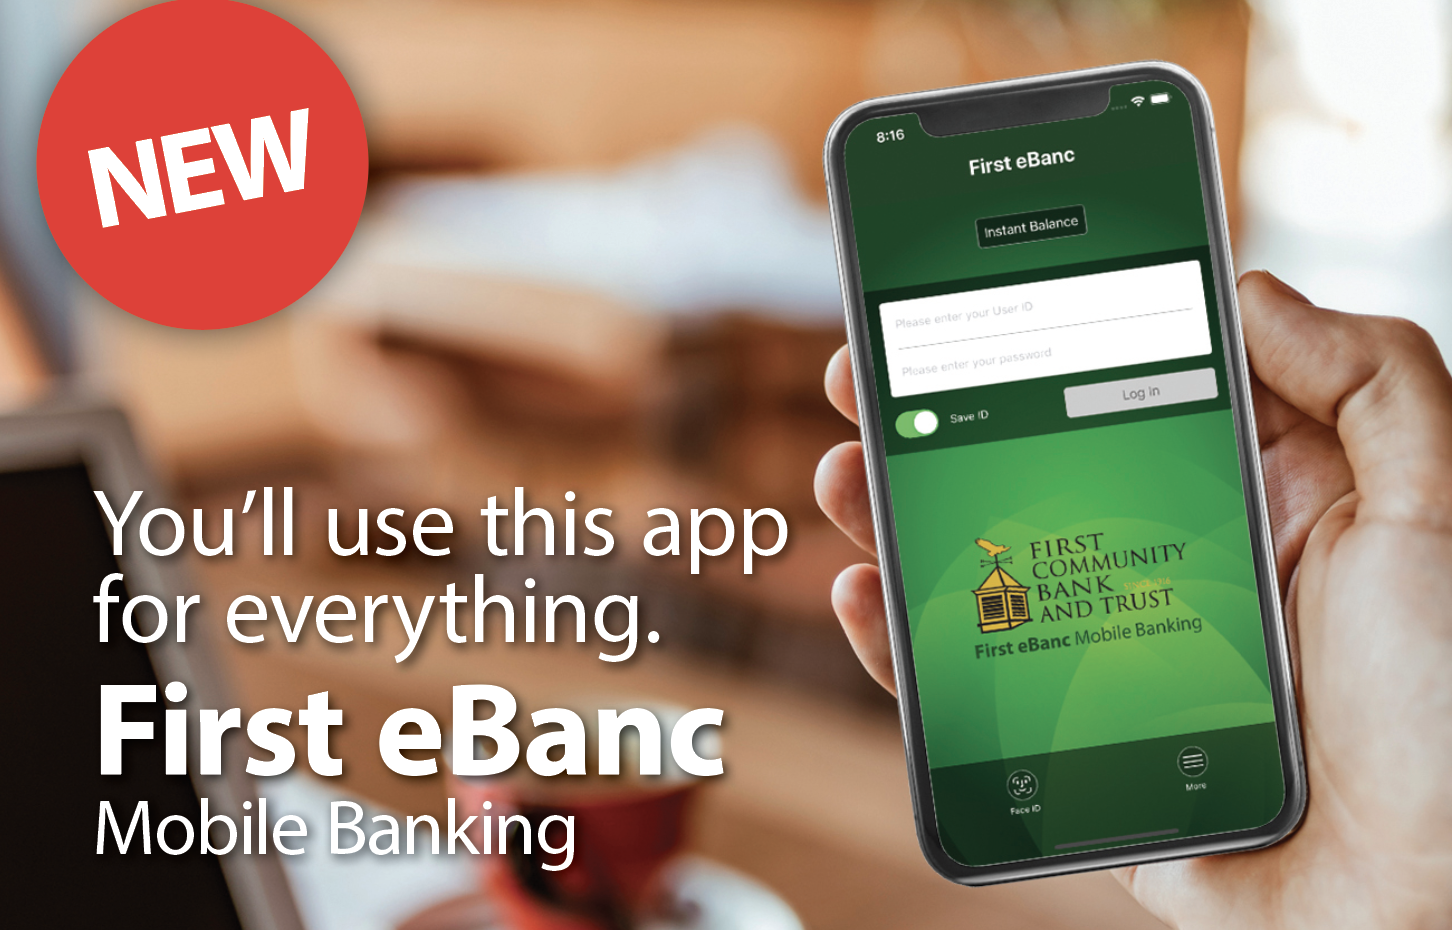 First Community Bank and Trust Announces New Mobile App